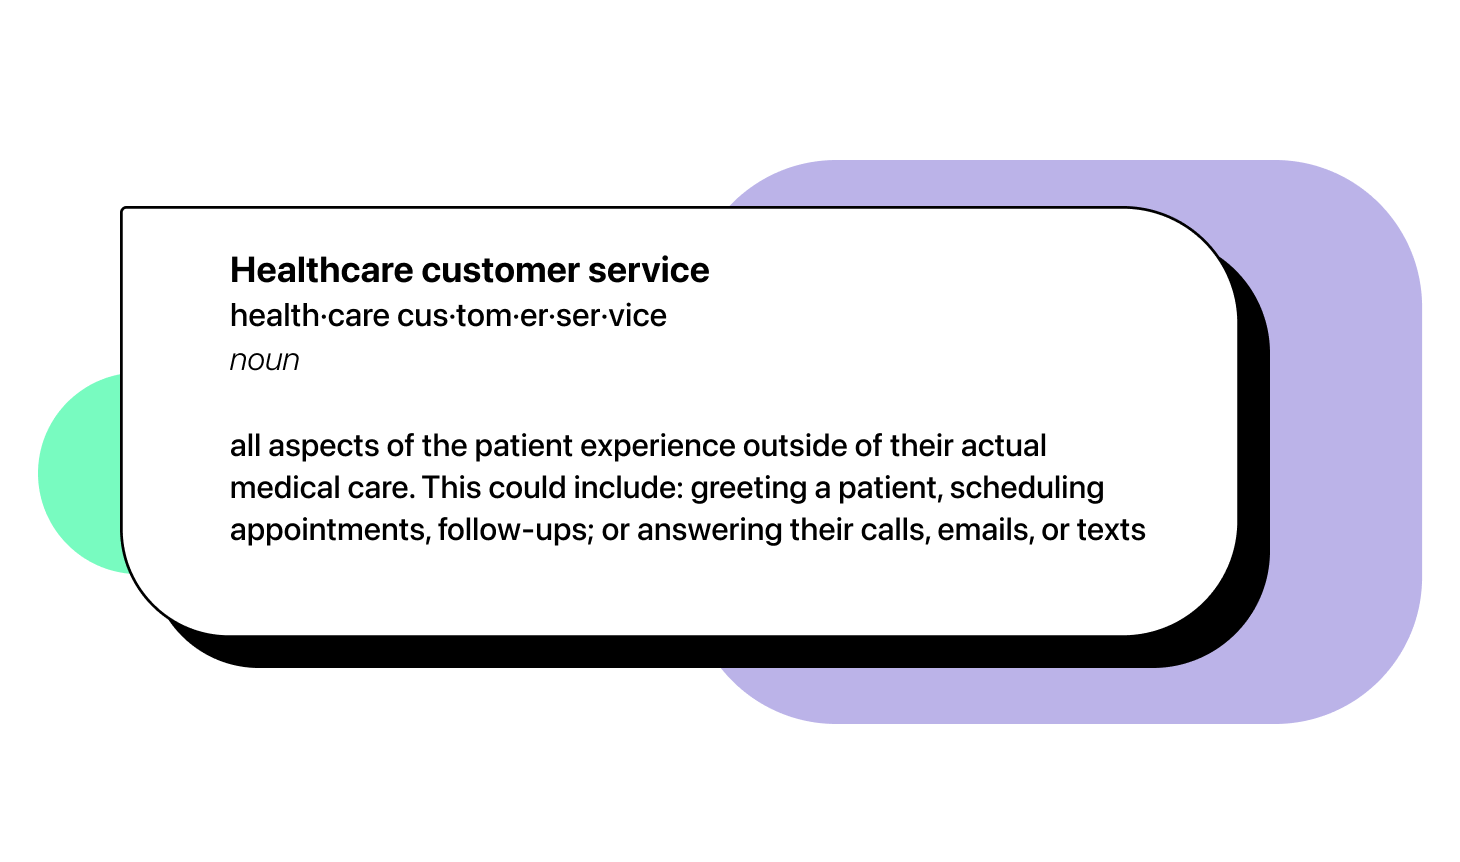 Healthcare customer service is all aspects of the patient experience outside of their actual medical care. This could include: greeting a patient, scheduling appointments, or answering their calls, emails, or texts